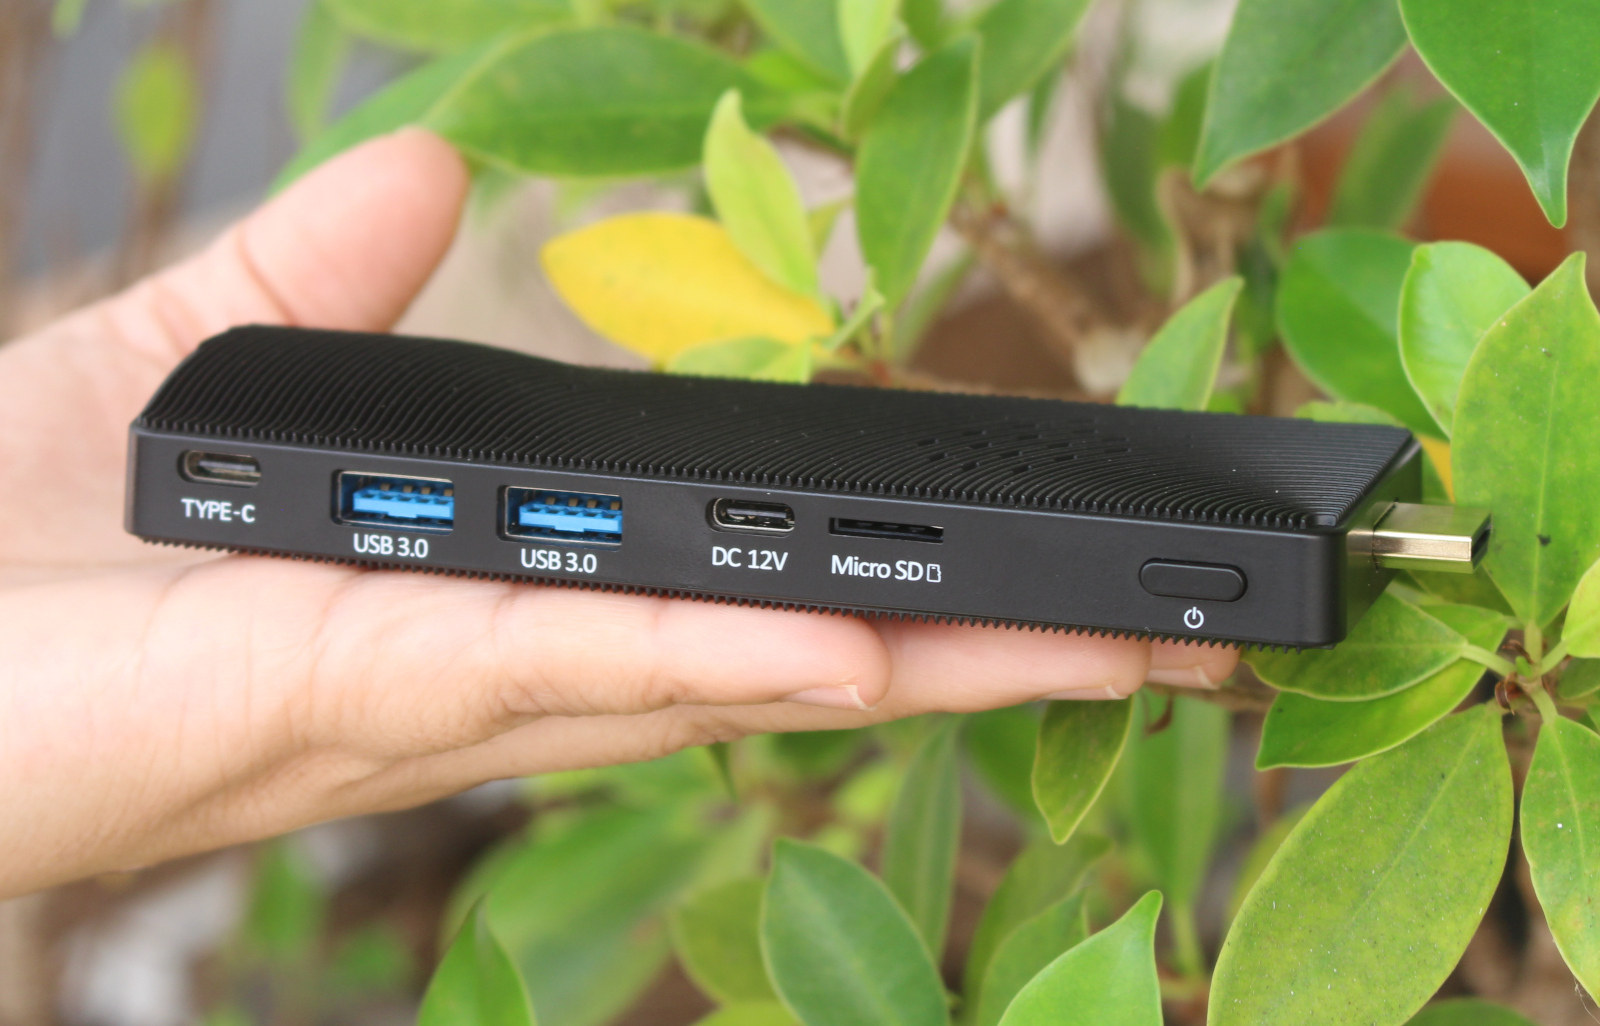 HIGOLE PC STICK (J4125+WiFi 6) review - Part 1: Specs, unboxing, teardown,  and first boot - CNX Software